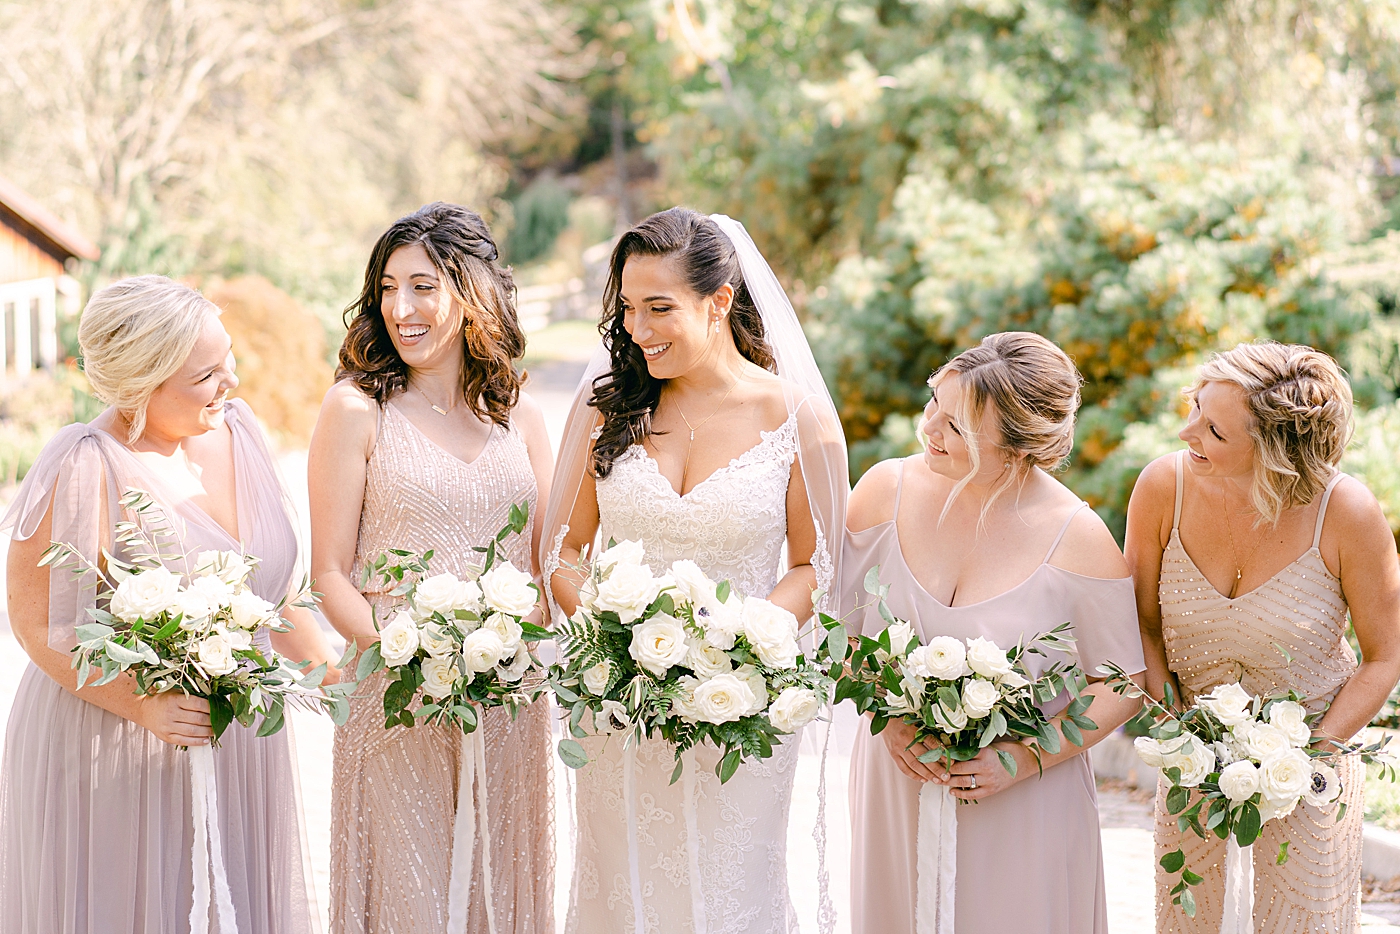 Bridesmaids smiling holding bouquets | Photo by Hope Helmuth Photography